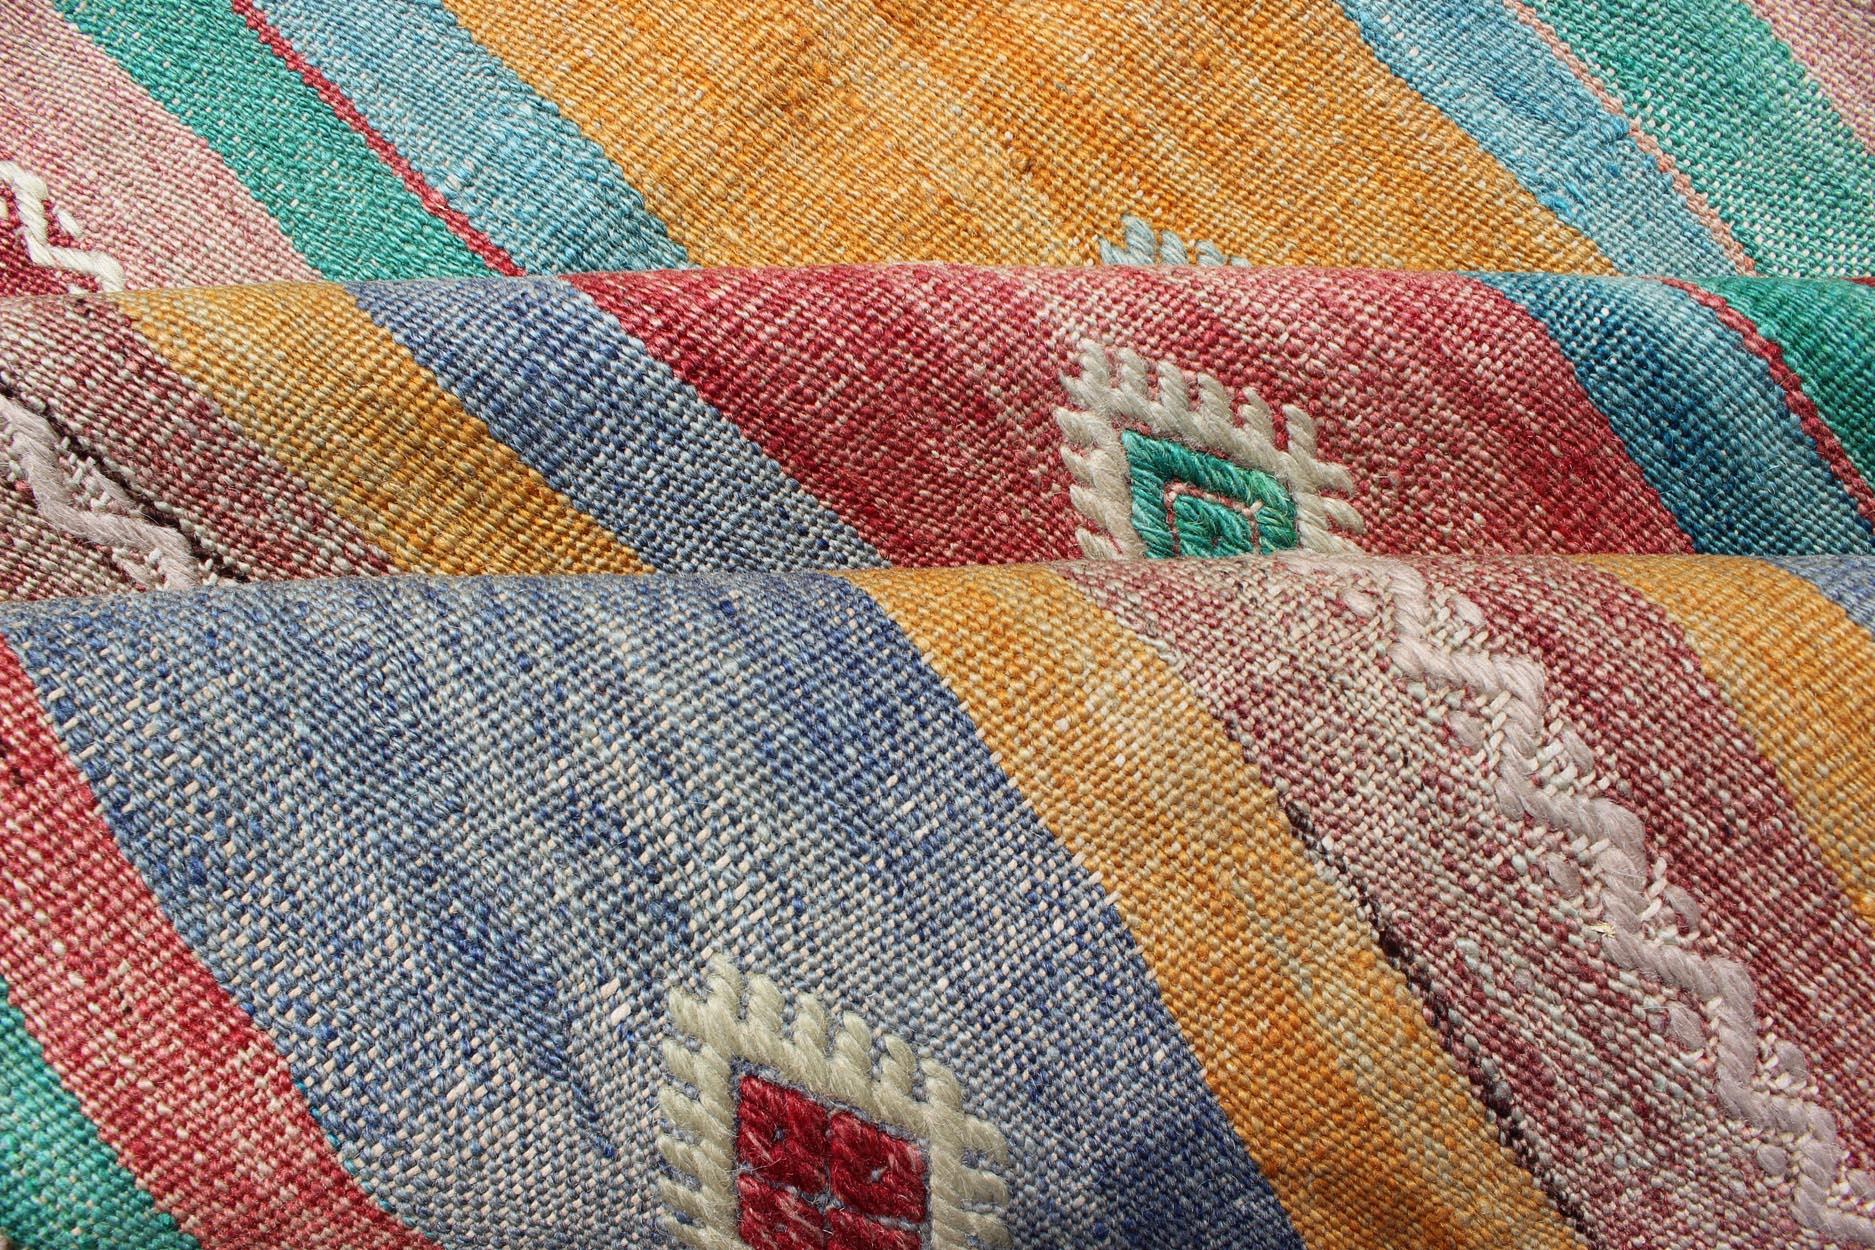 Hand-Woven Bright and Colorful Flat-Weave Turkish Kilim Rug with Geometric Stripe Design For Sale